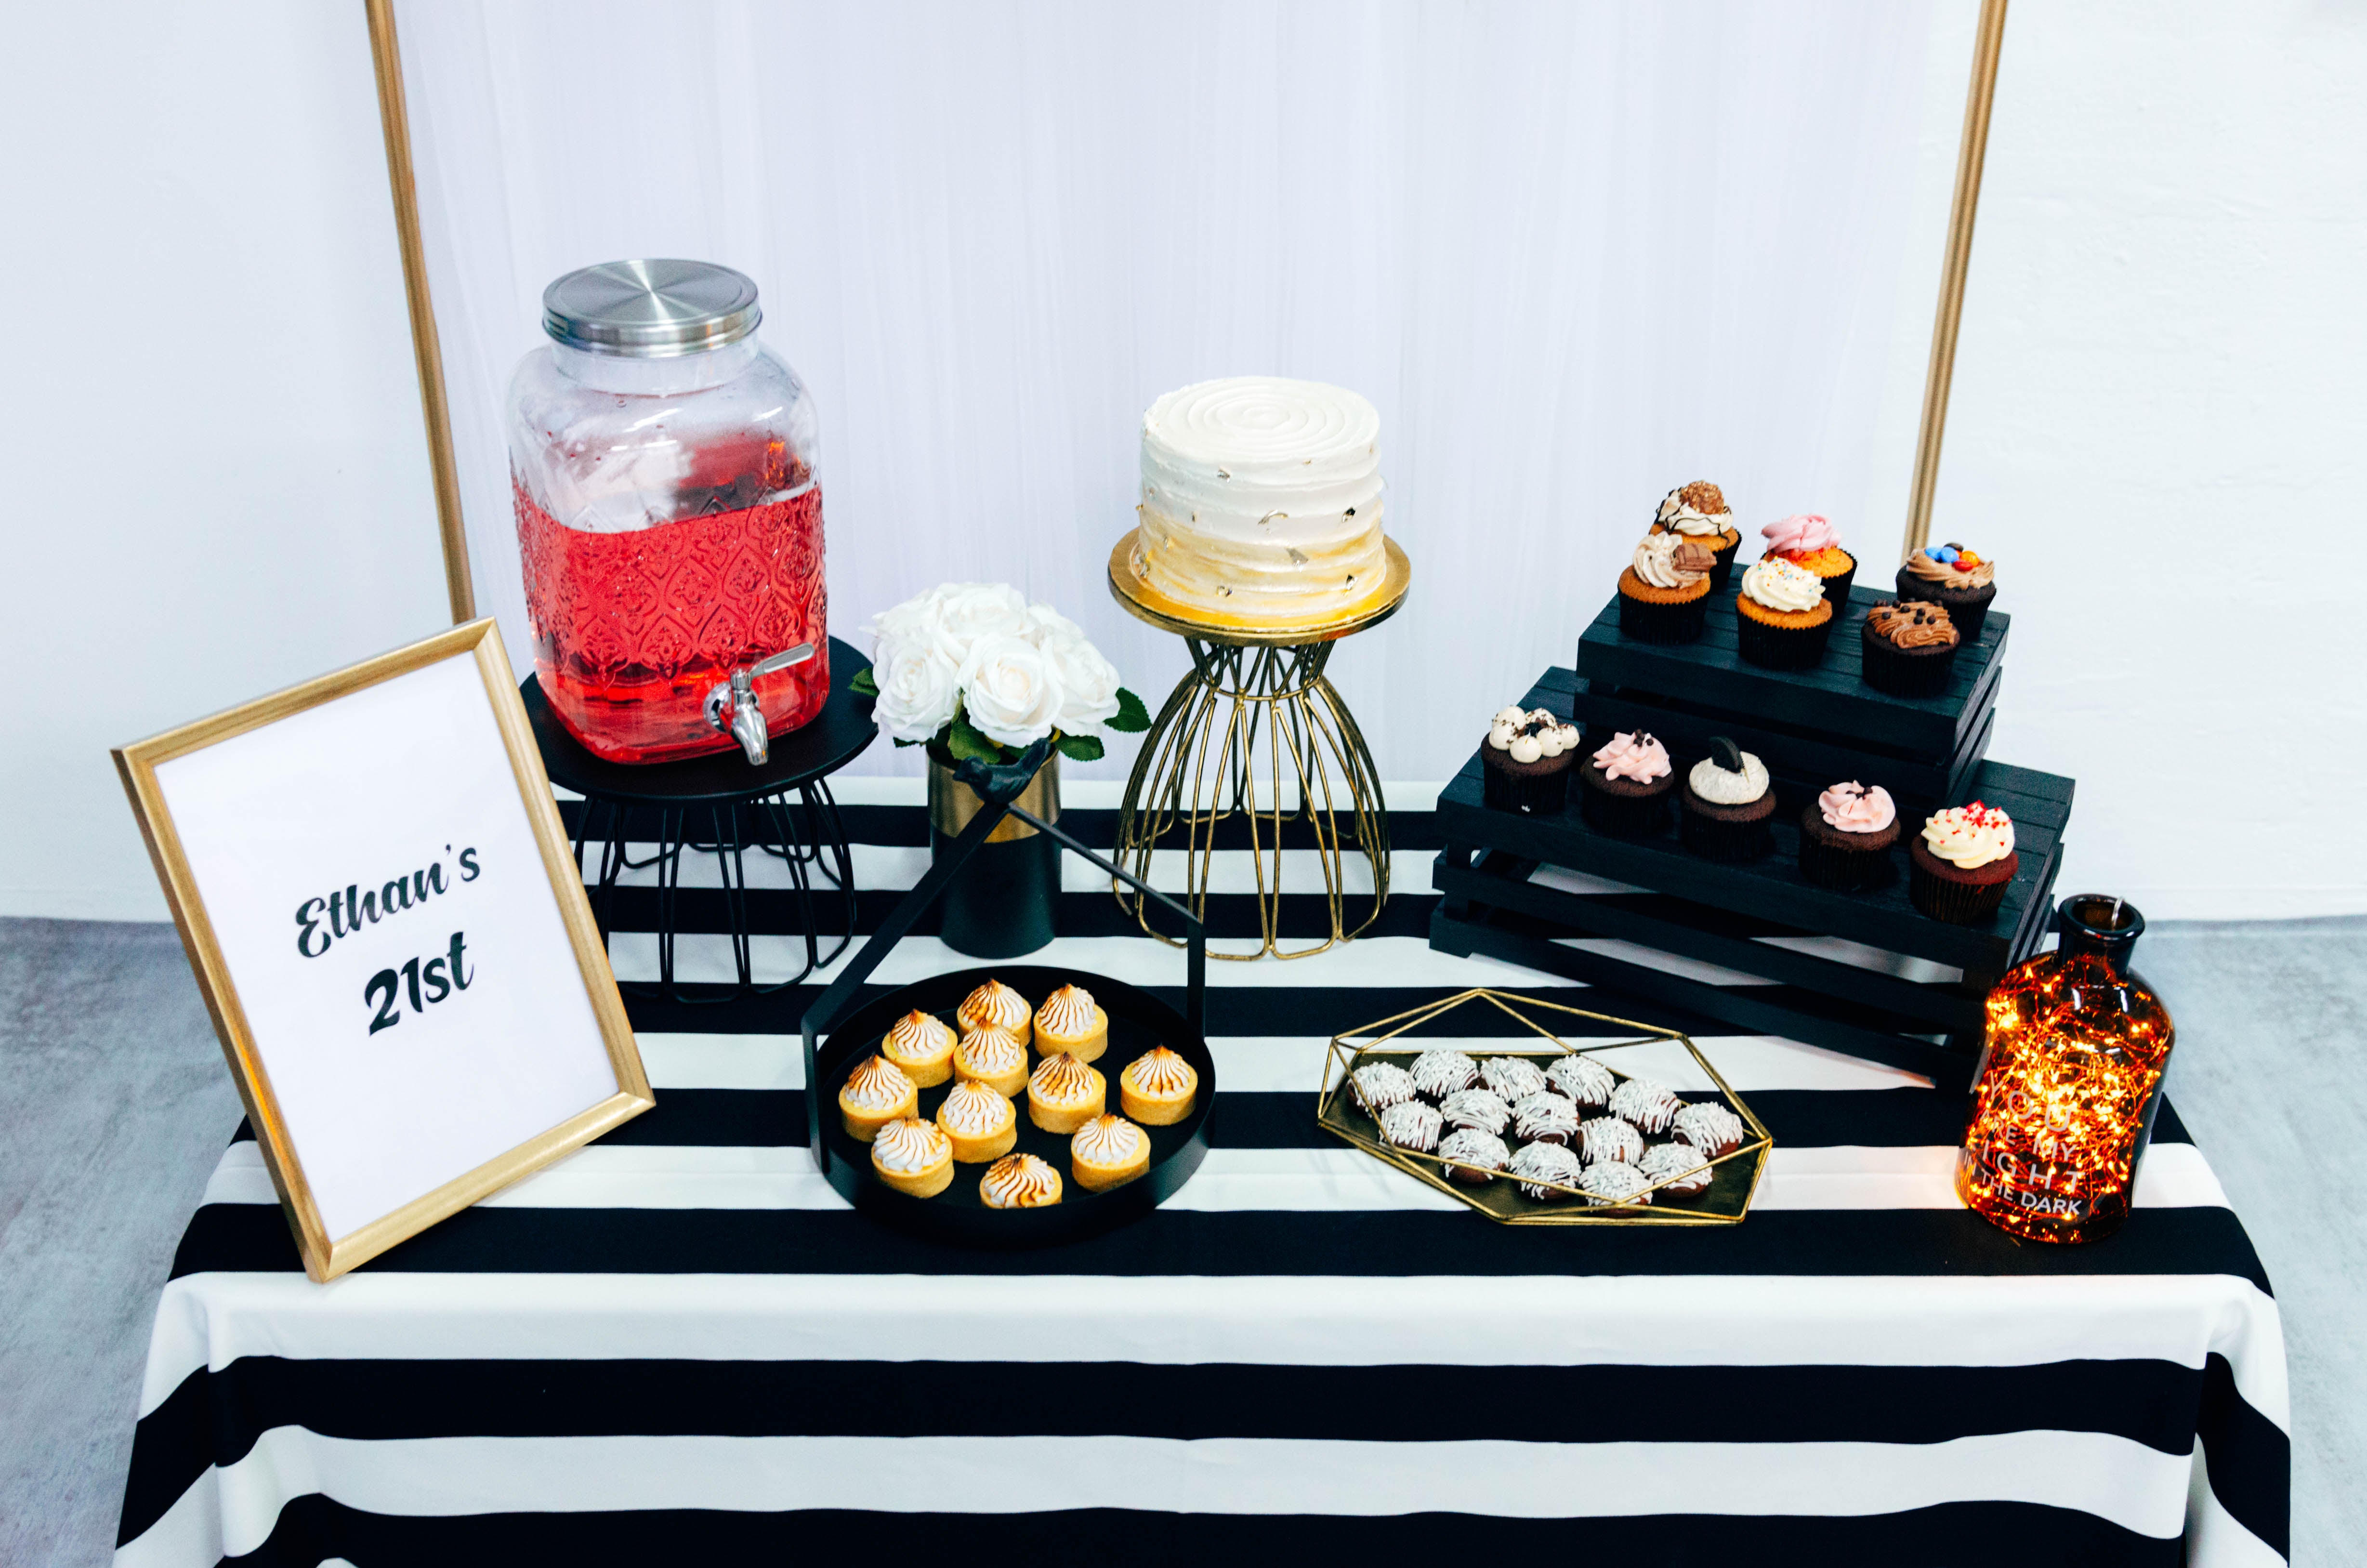 Contemporary Dessert Table in White, Black, Gold for Birthday Party by Style It Simply